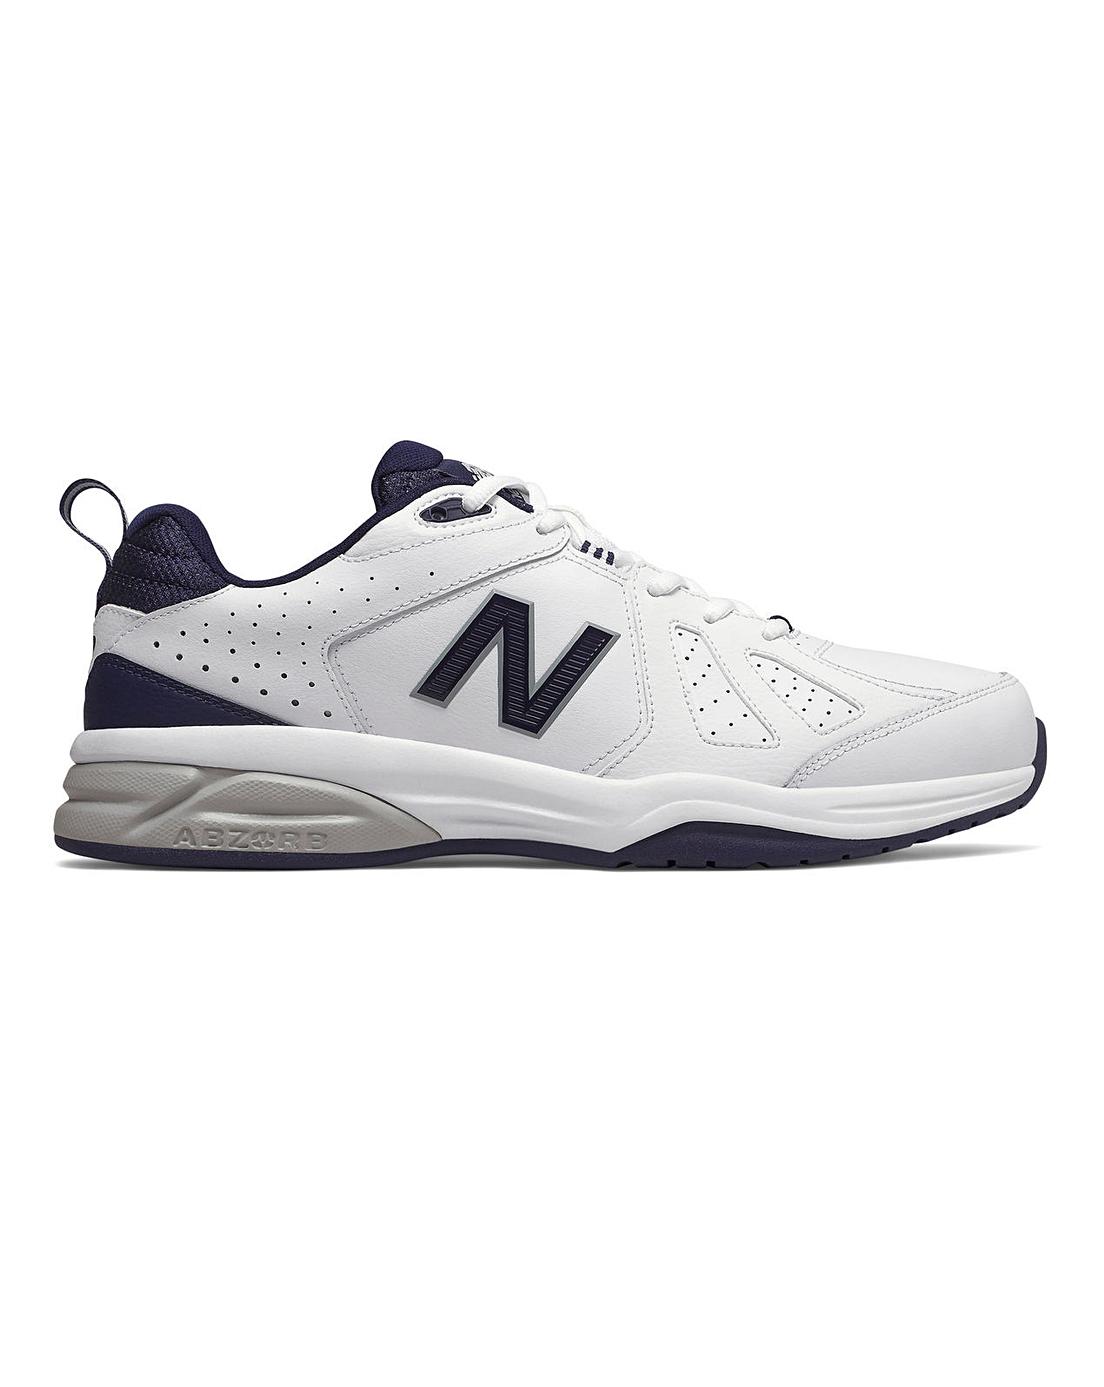 New Balance MX624 Lace Trainers Wide Fit | J D Williams